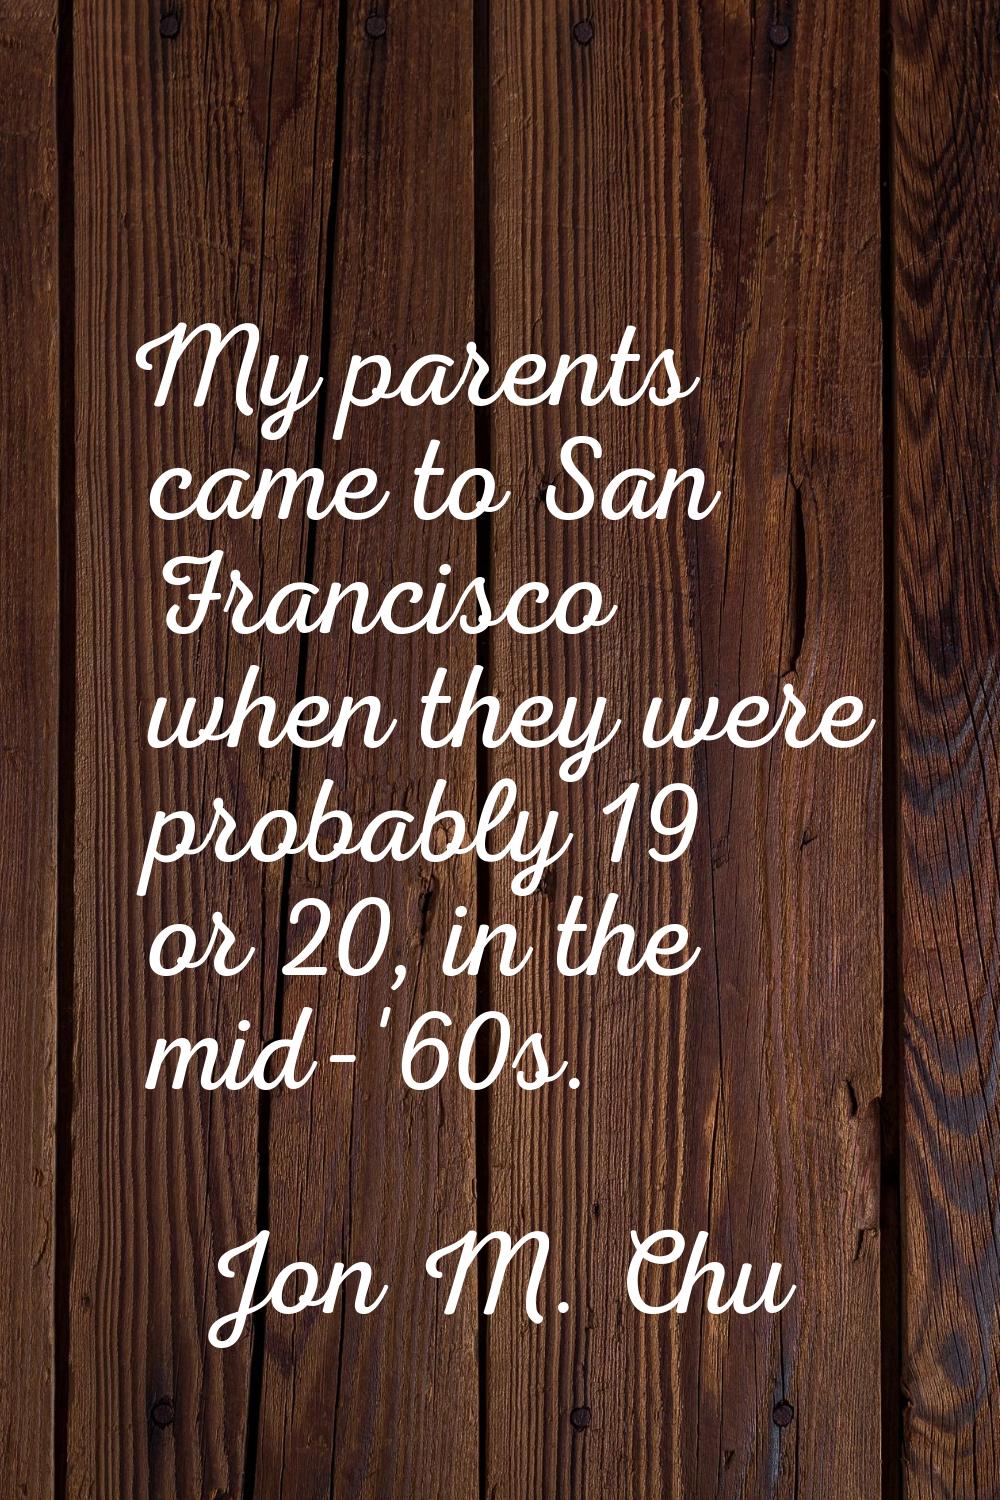 My parents came to San Francisco when they were probably 19 or 20, in the mid-'60s.